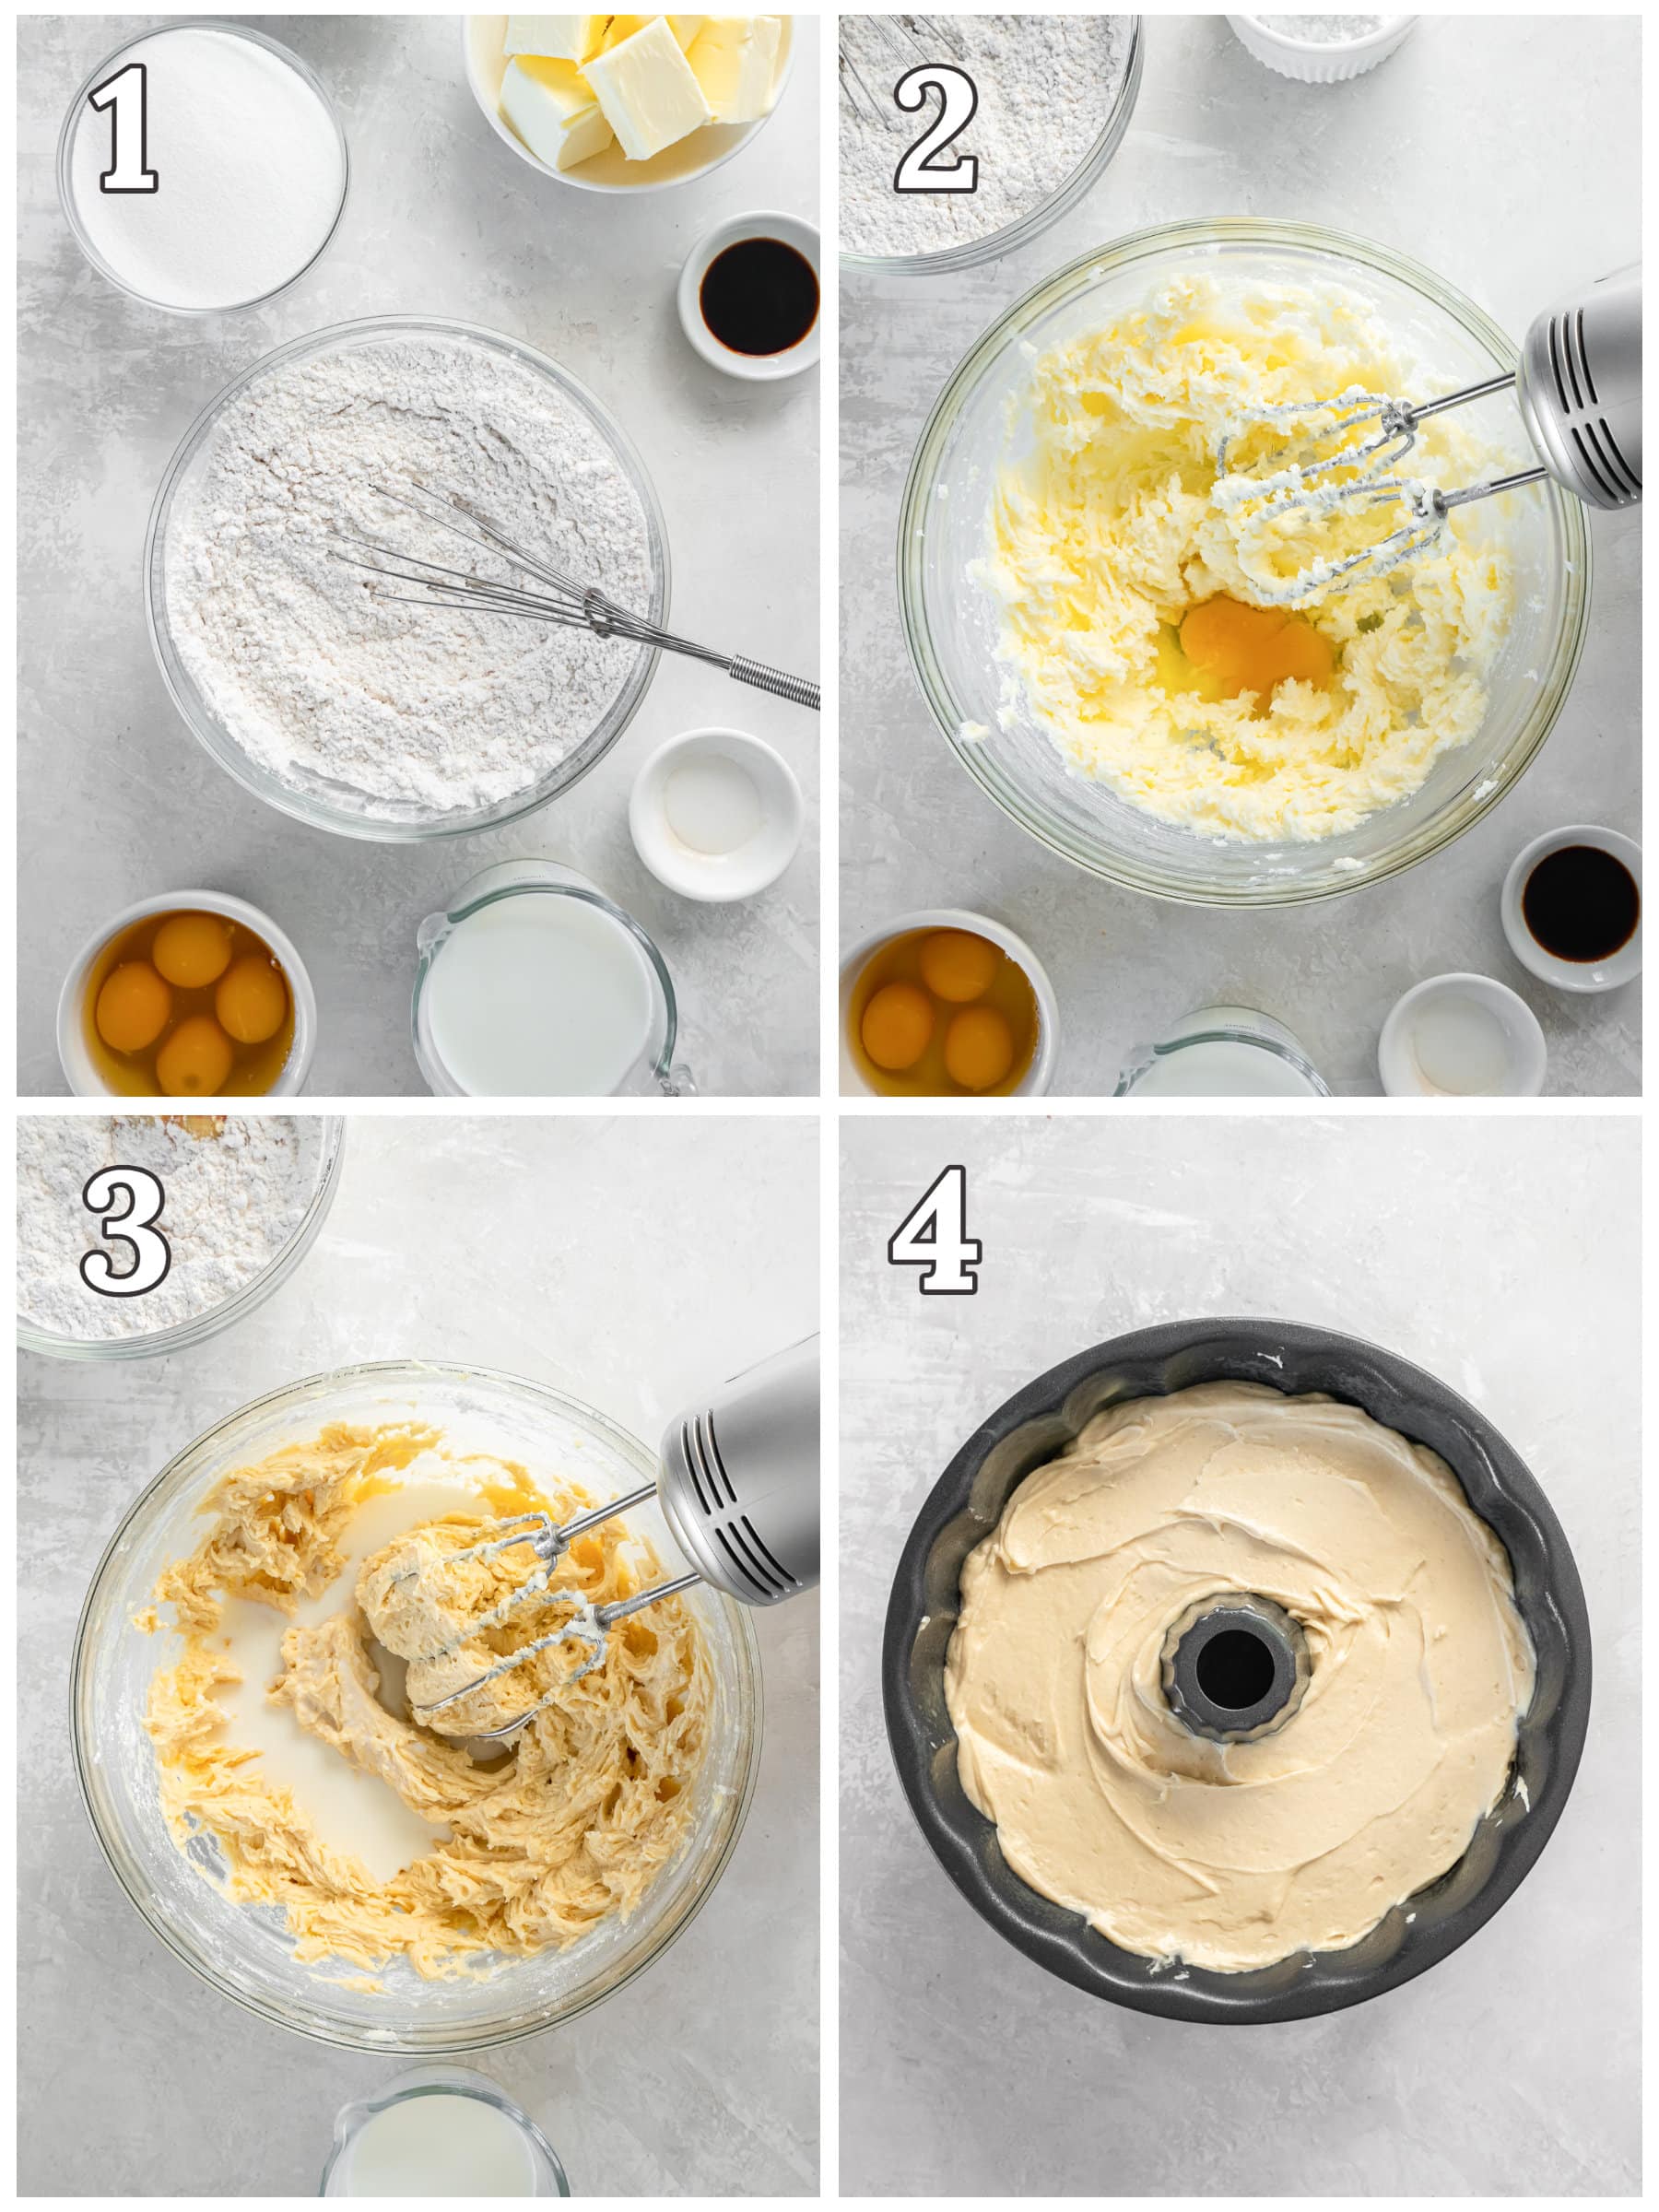 photo collage demonstrating how to make vanilla bundt cake in a mixing bowl.